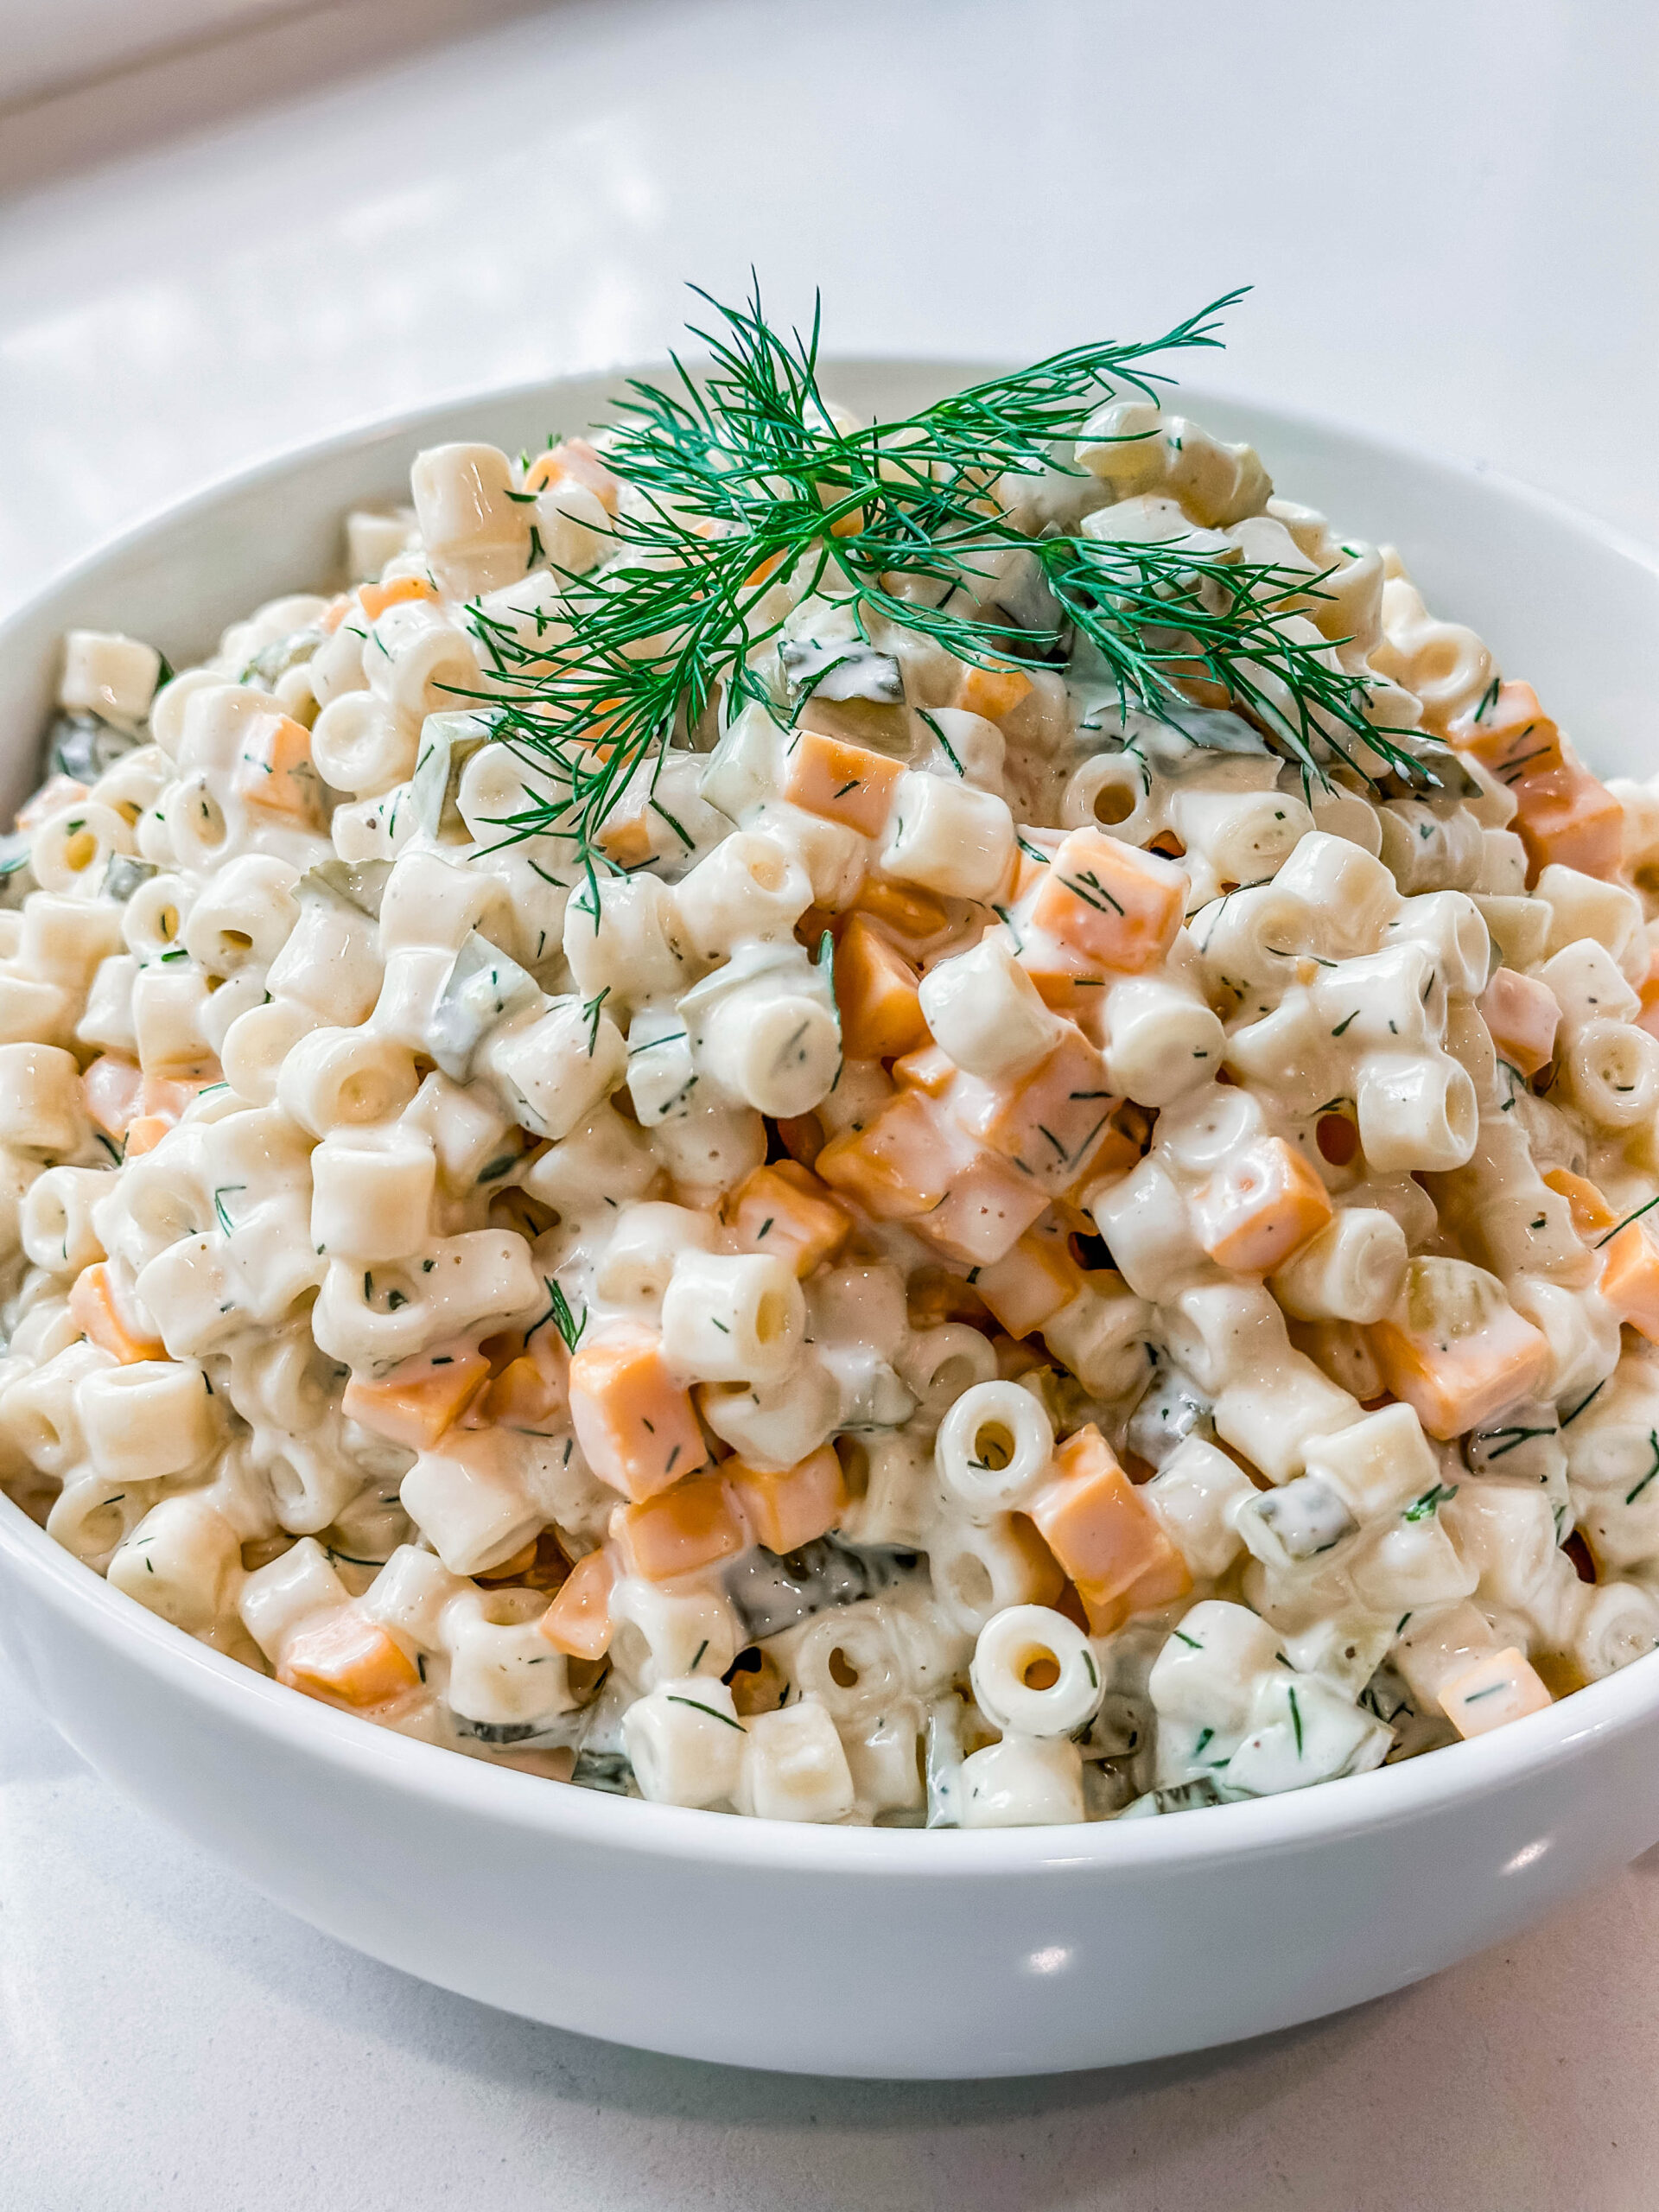 Creamy Dill Pickle Pasta Salad In a white serving bowl, garnished with fresh sprigs of dill. 